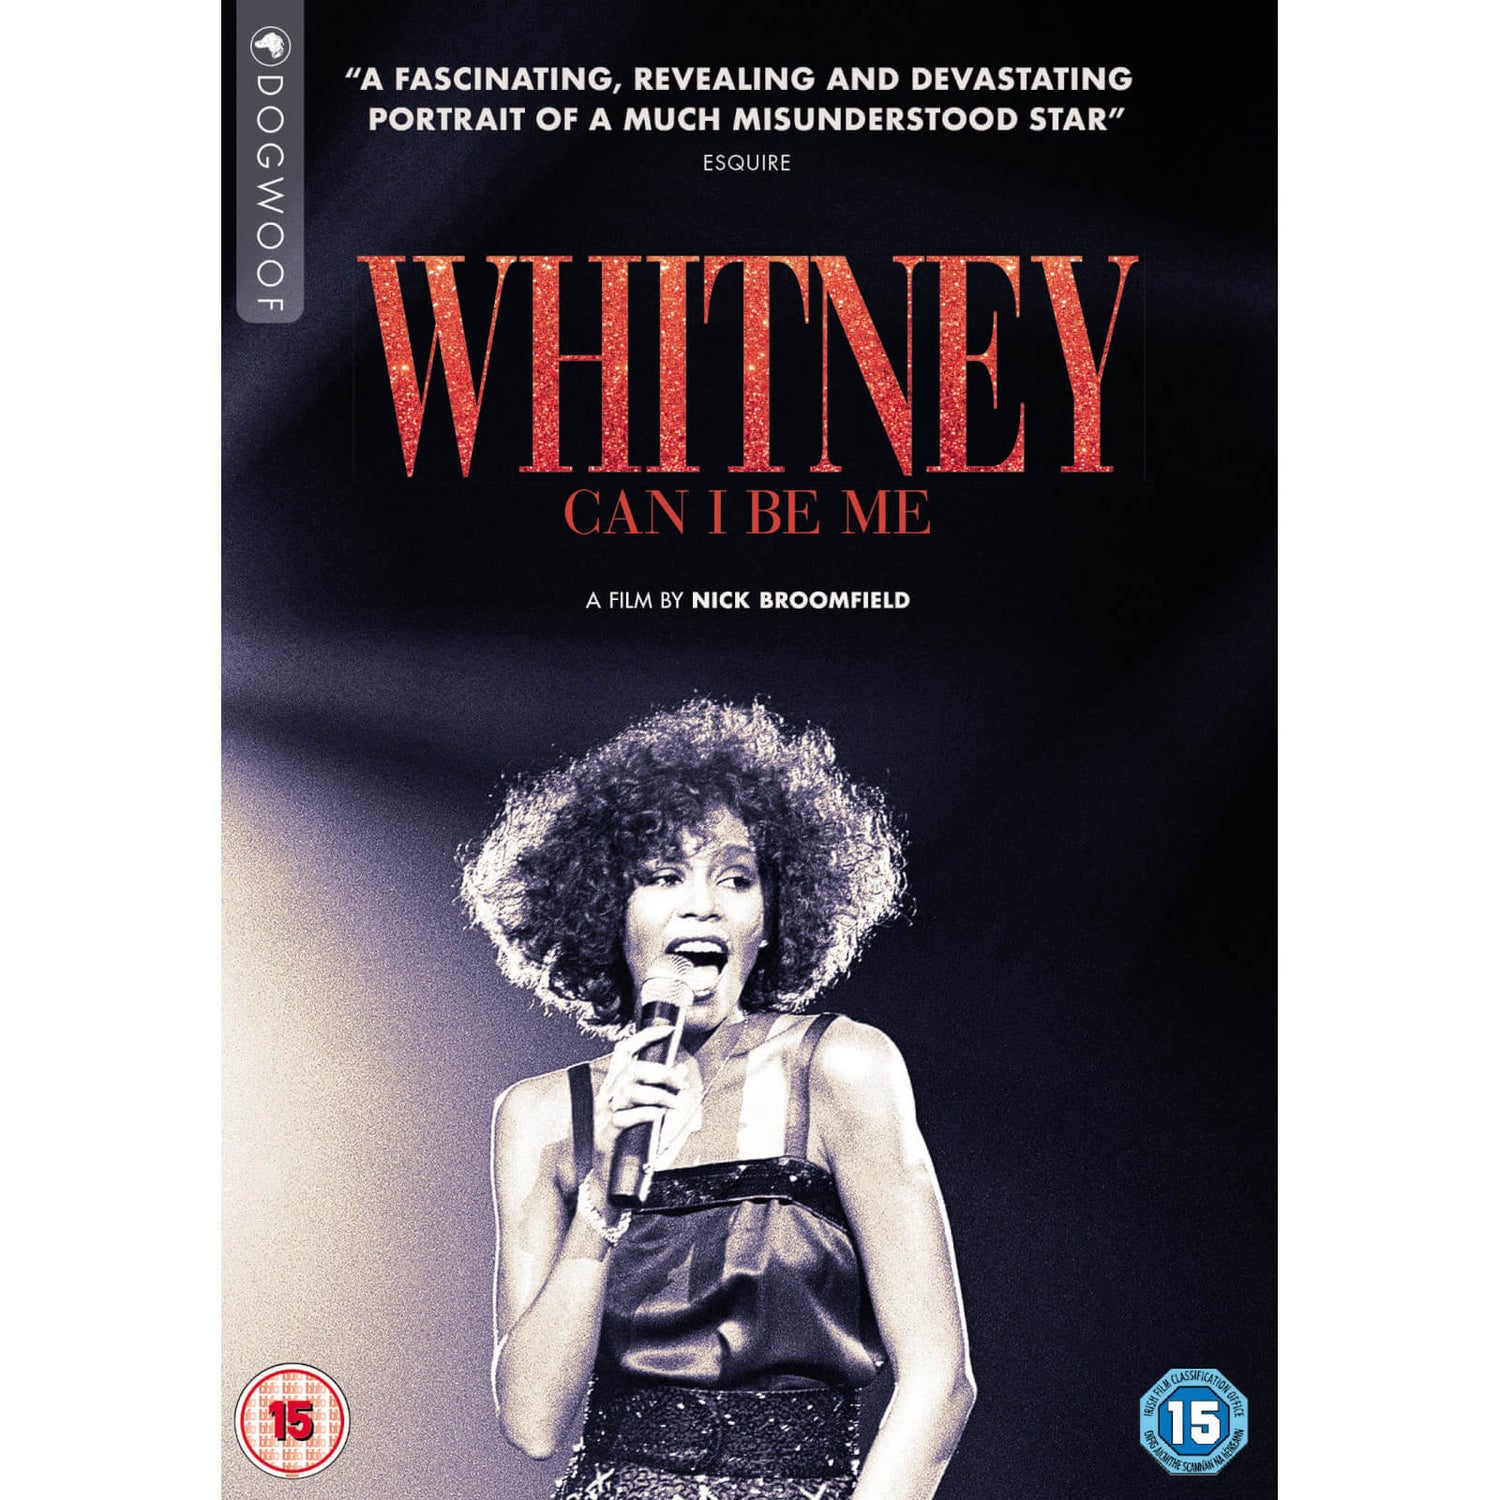 Whitney 'Can I Be Me'